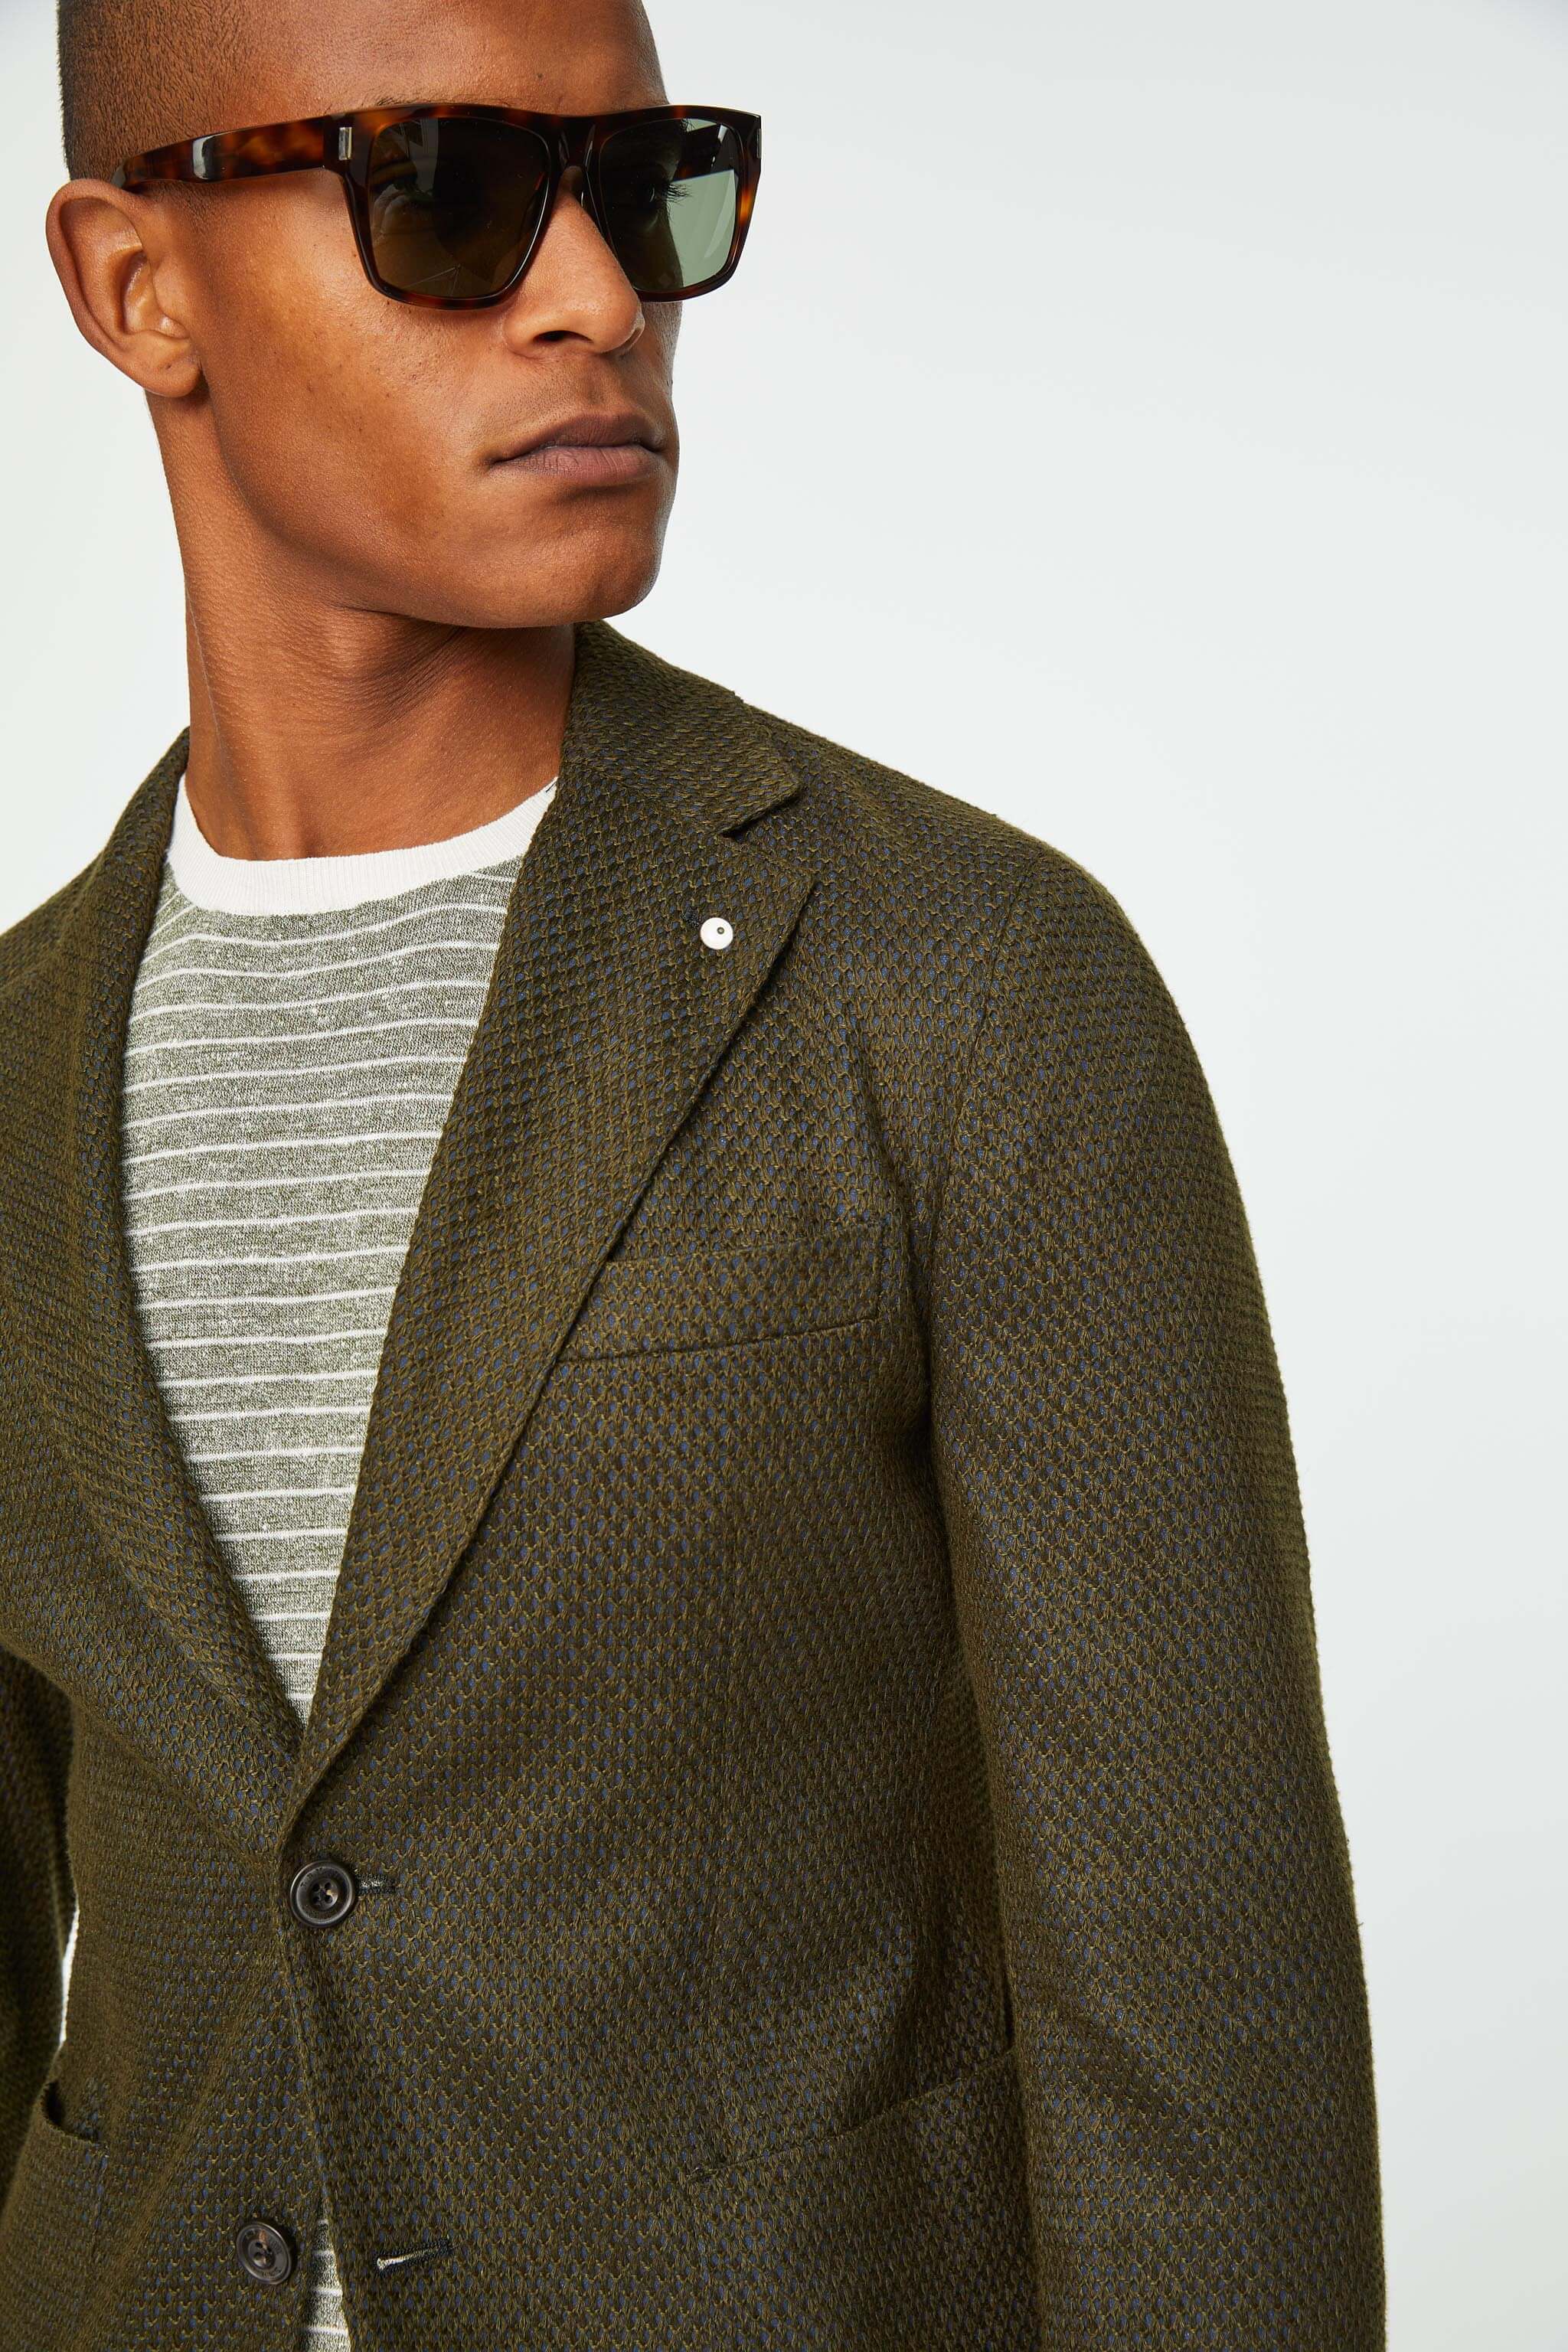 PUNTO jacket in army green